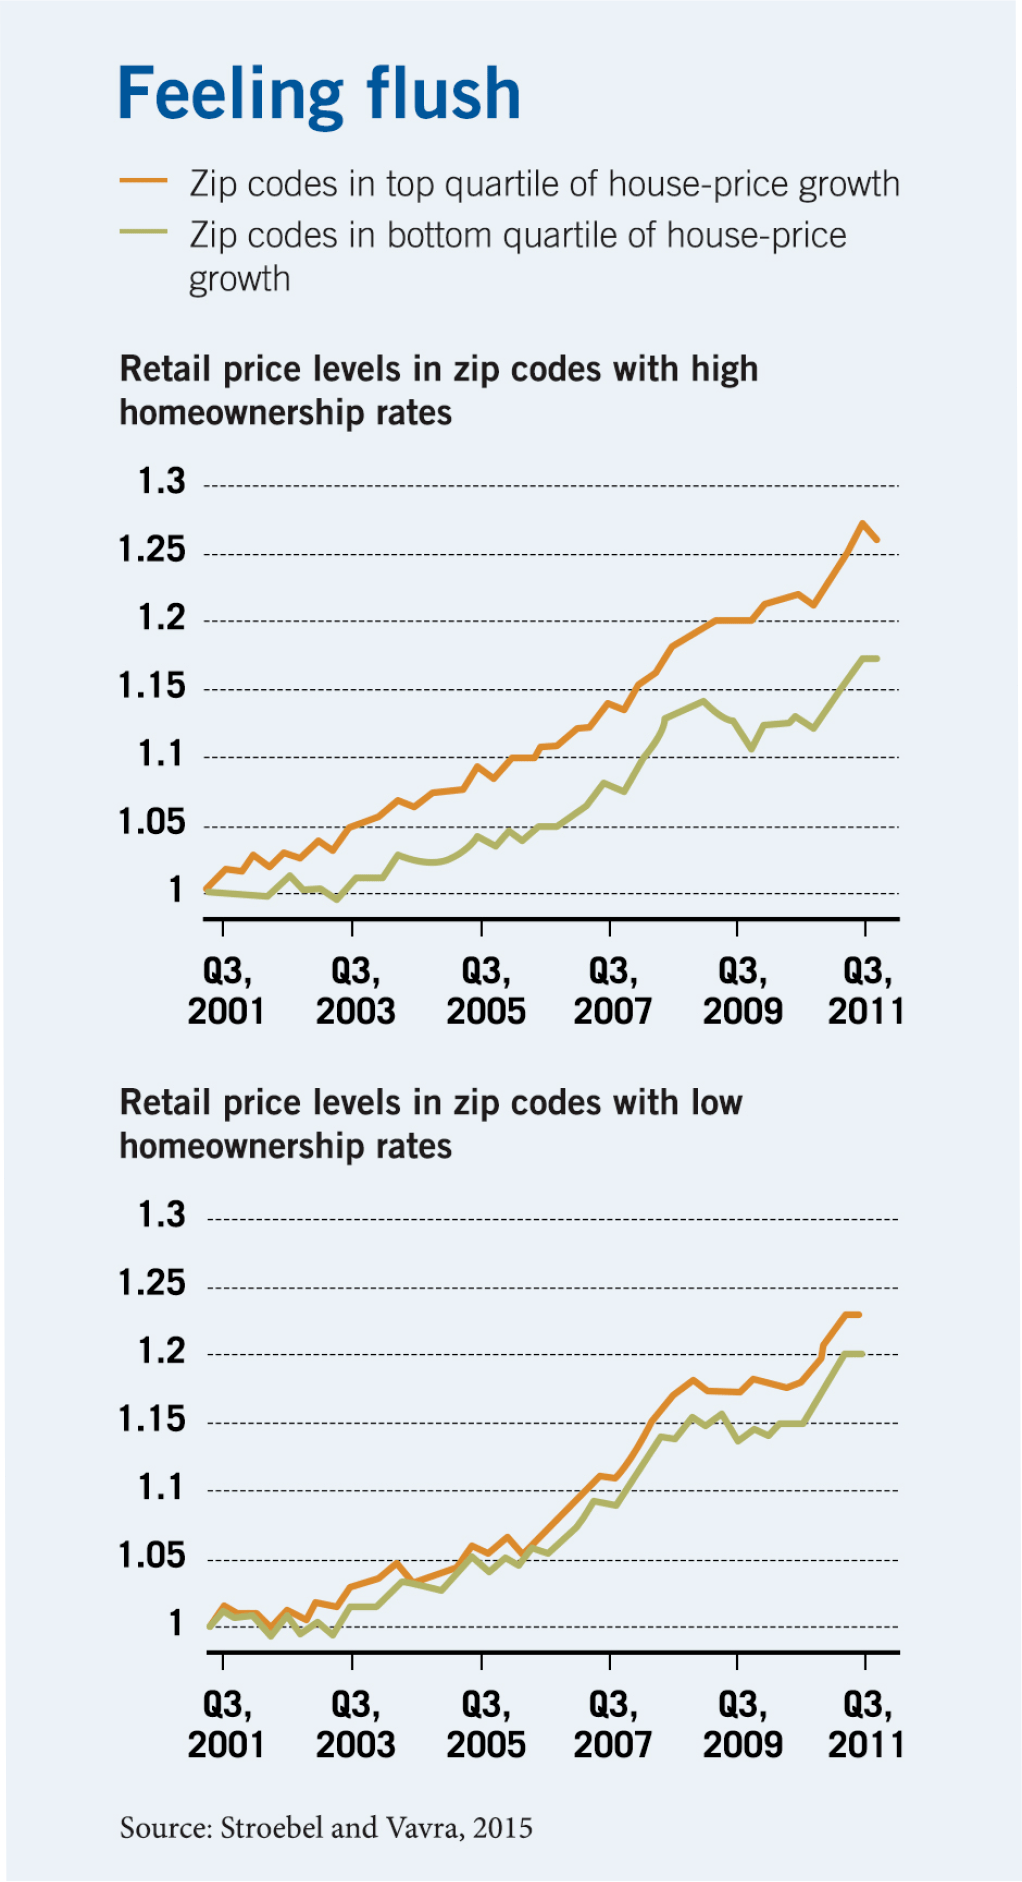 Two bar charts plotting retail prices as an index, with one equaling levels during in the third quarter of 2001 and the years of 2001 to 2011 on the x-axis. The first chart shows zip codes with high homeownership rates, with one line tracking those in the top quartile of house price growth rising to a retail-price index value of nearly one-point-three, and a second line tracking the bottom quartile rising to a retail-price index value of less than one one-point-two. The second chart shows zip codes with low homeownership, with both lines following a nearly parallel path and rising to values between one-point-two and one-point-two-five.